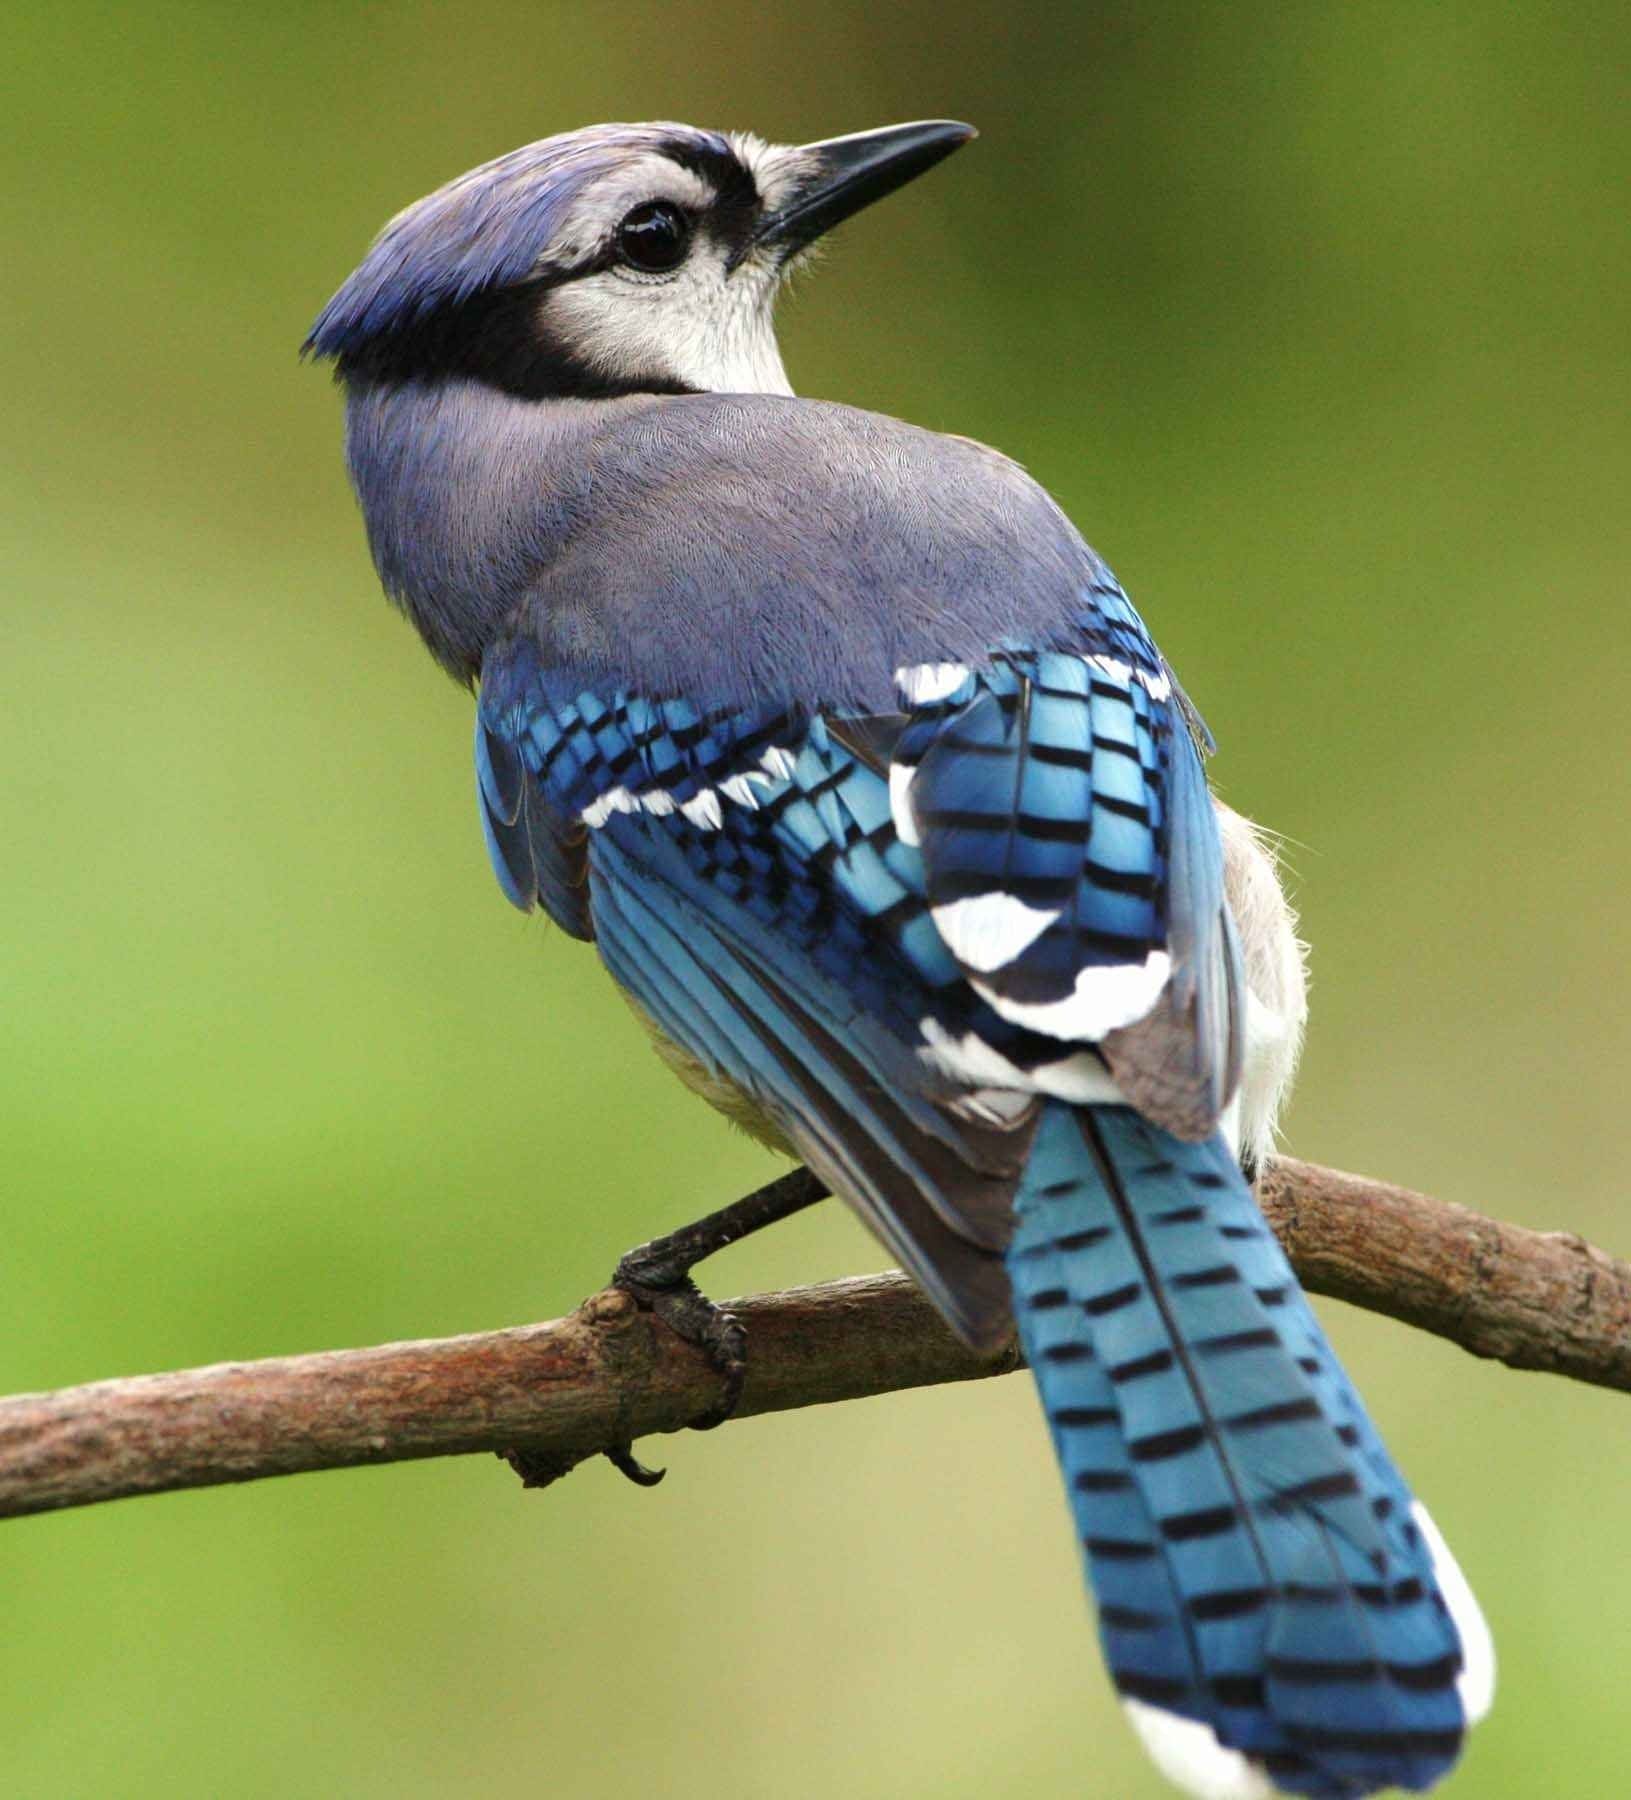 State asks residents to remove bird feeders until cause of mystery illness is found